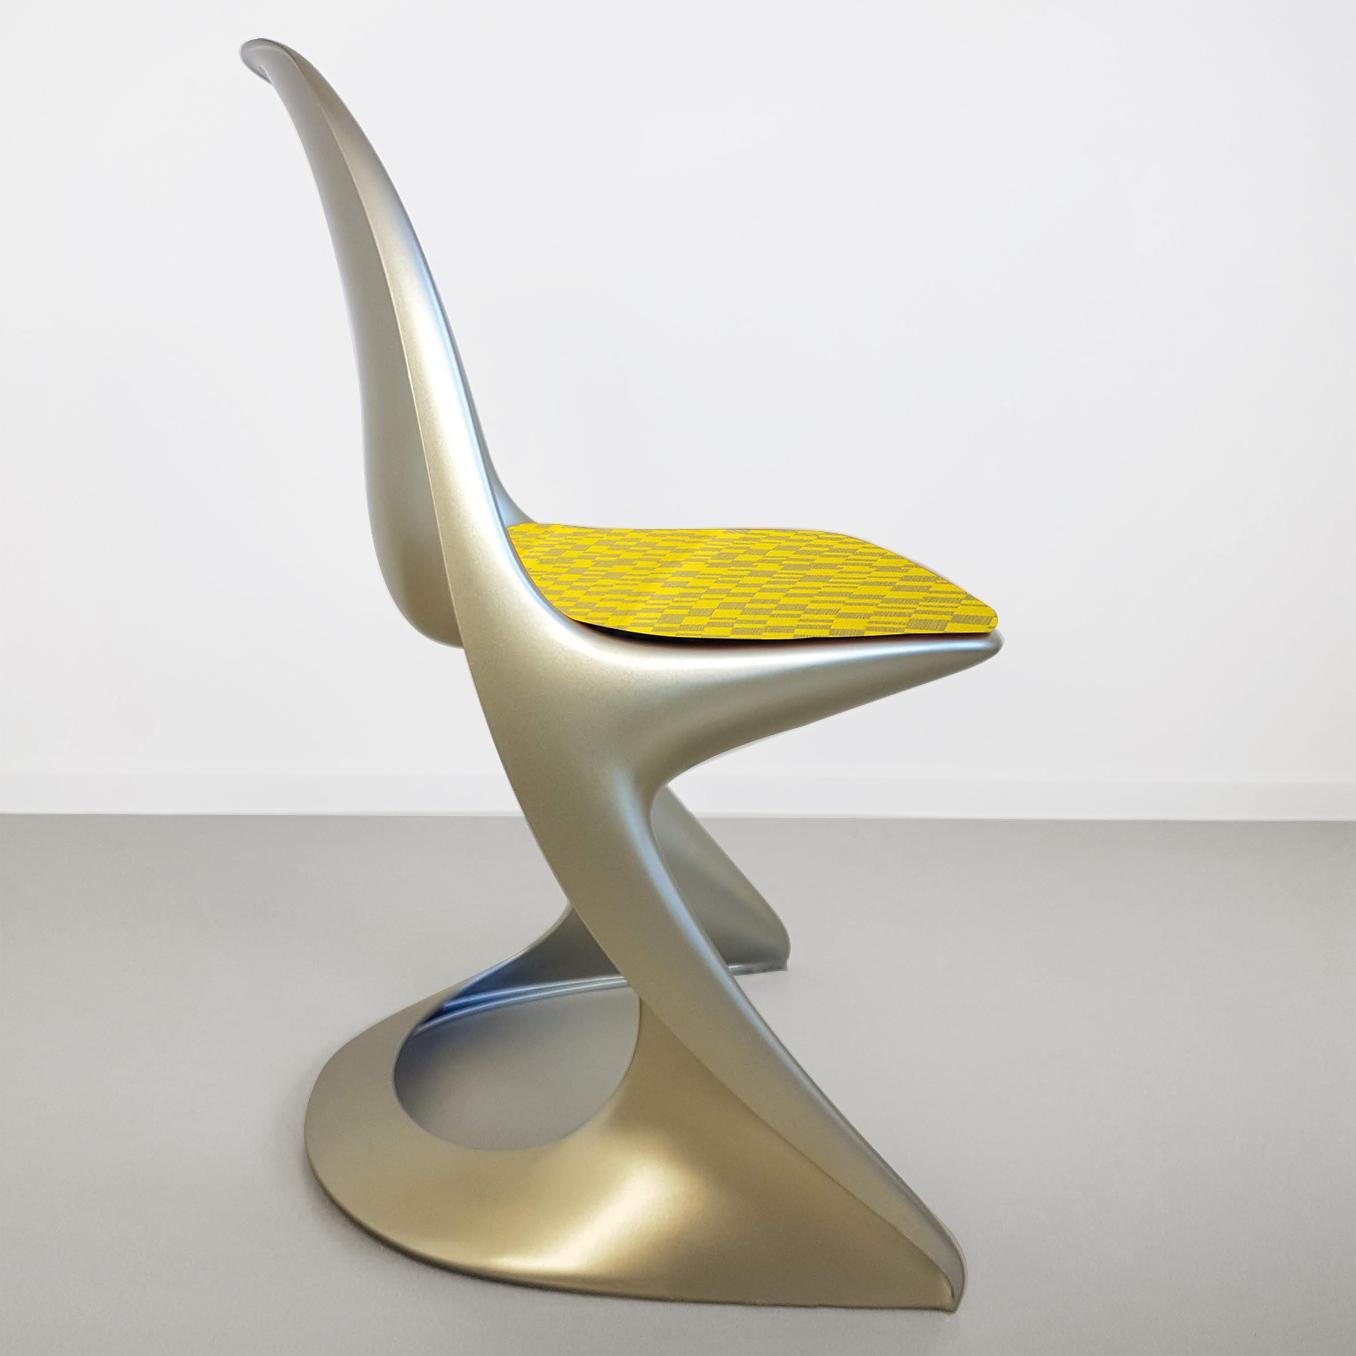 Late 20th Century Limited Edition, Set of Six Metallic Ostergaard Space Age Chairs, 1970 For Sale